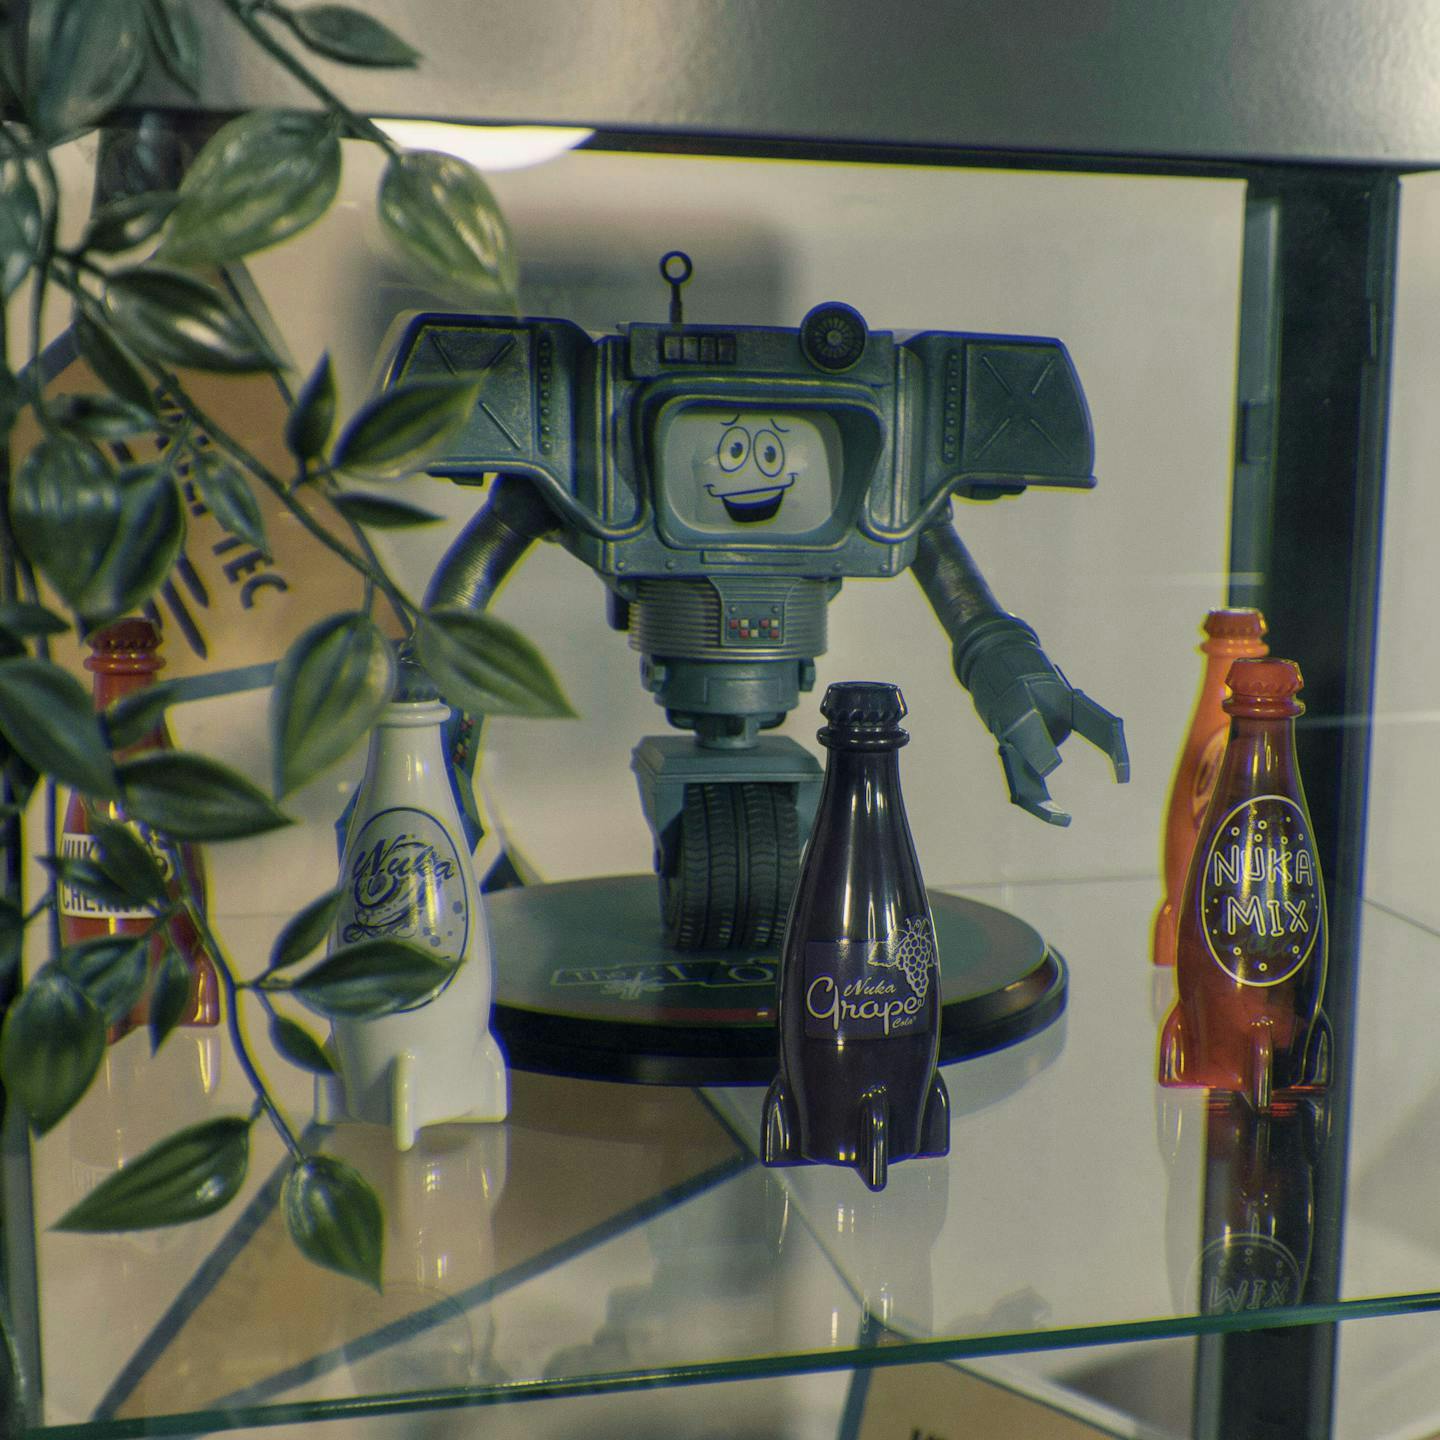 Gaming setup decor for Fallout with Securitron robot